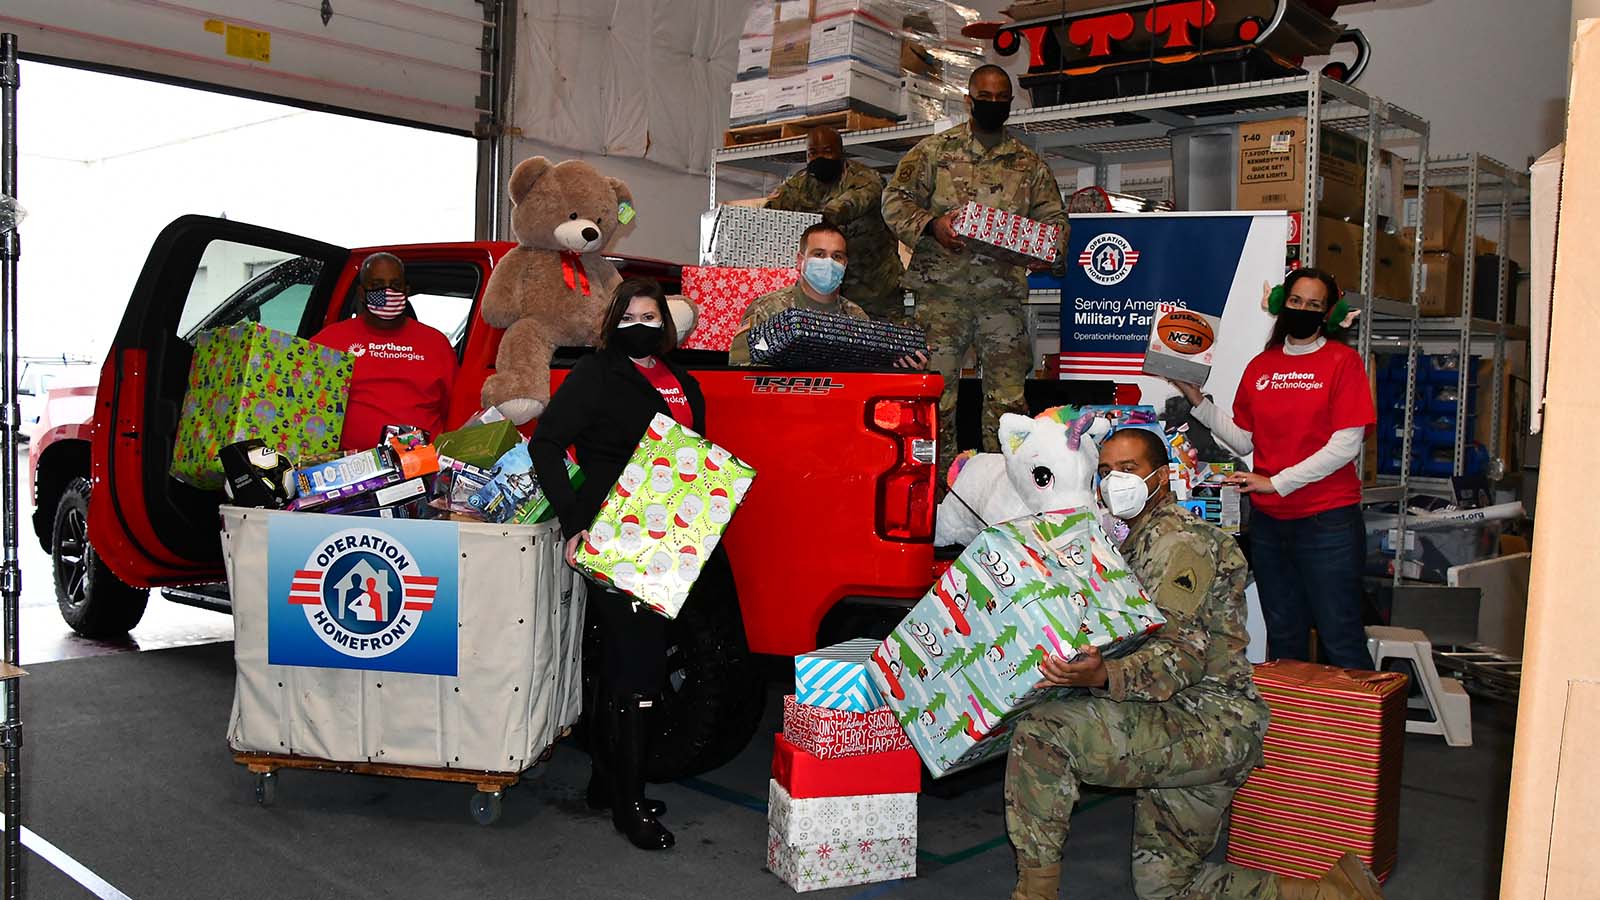 Raytheon Technologies volunteer with service members to help with Operation Homefront's Holiday Toy Drive.